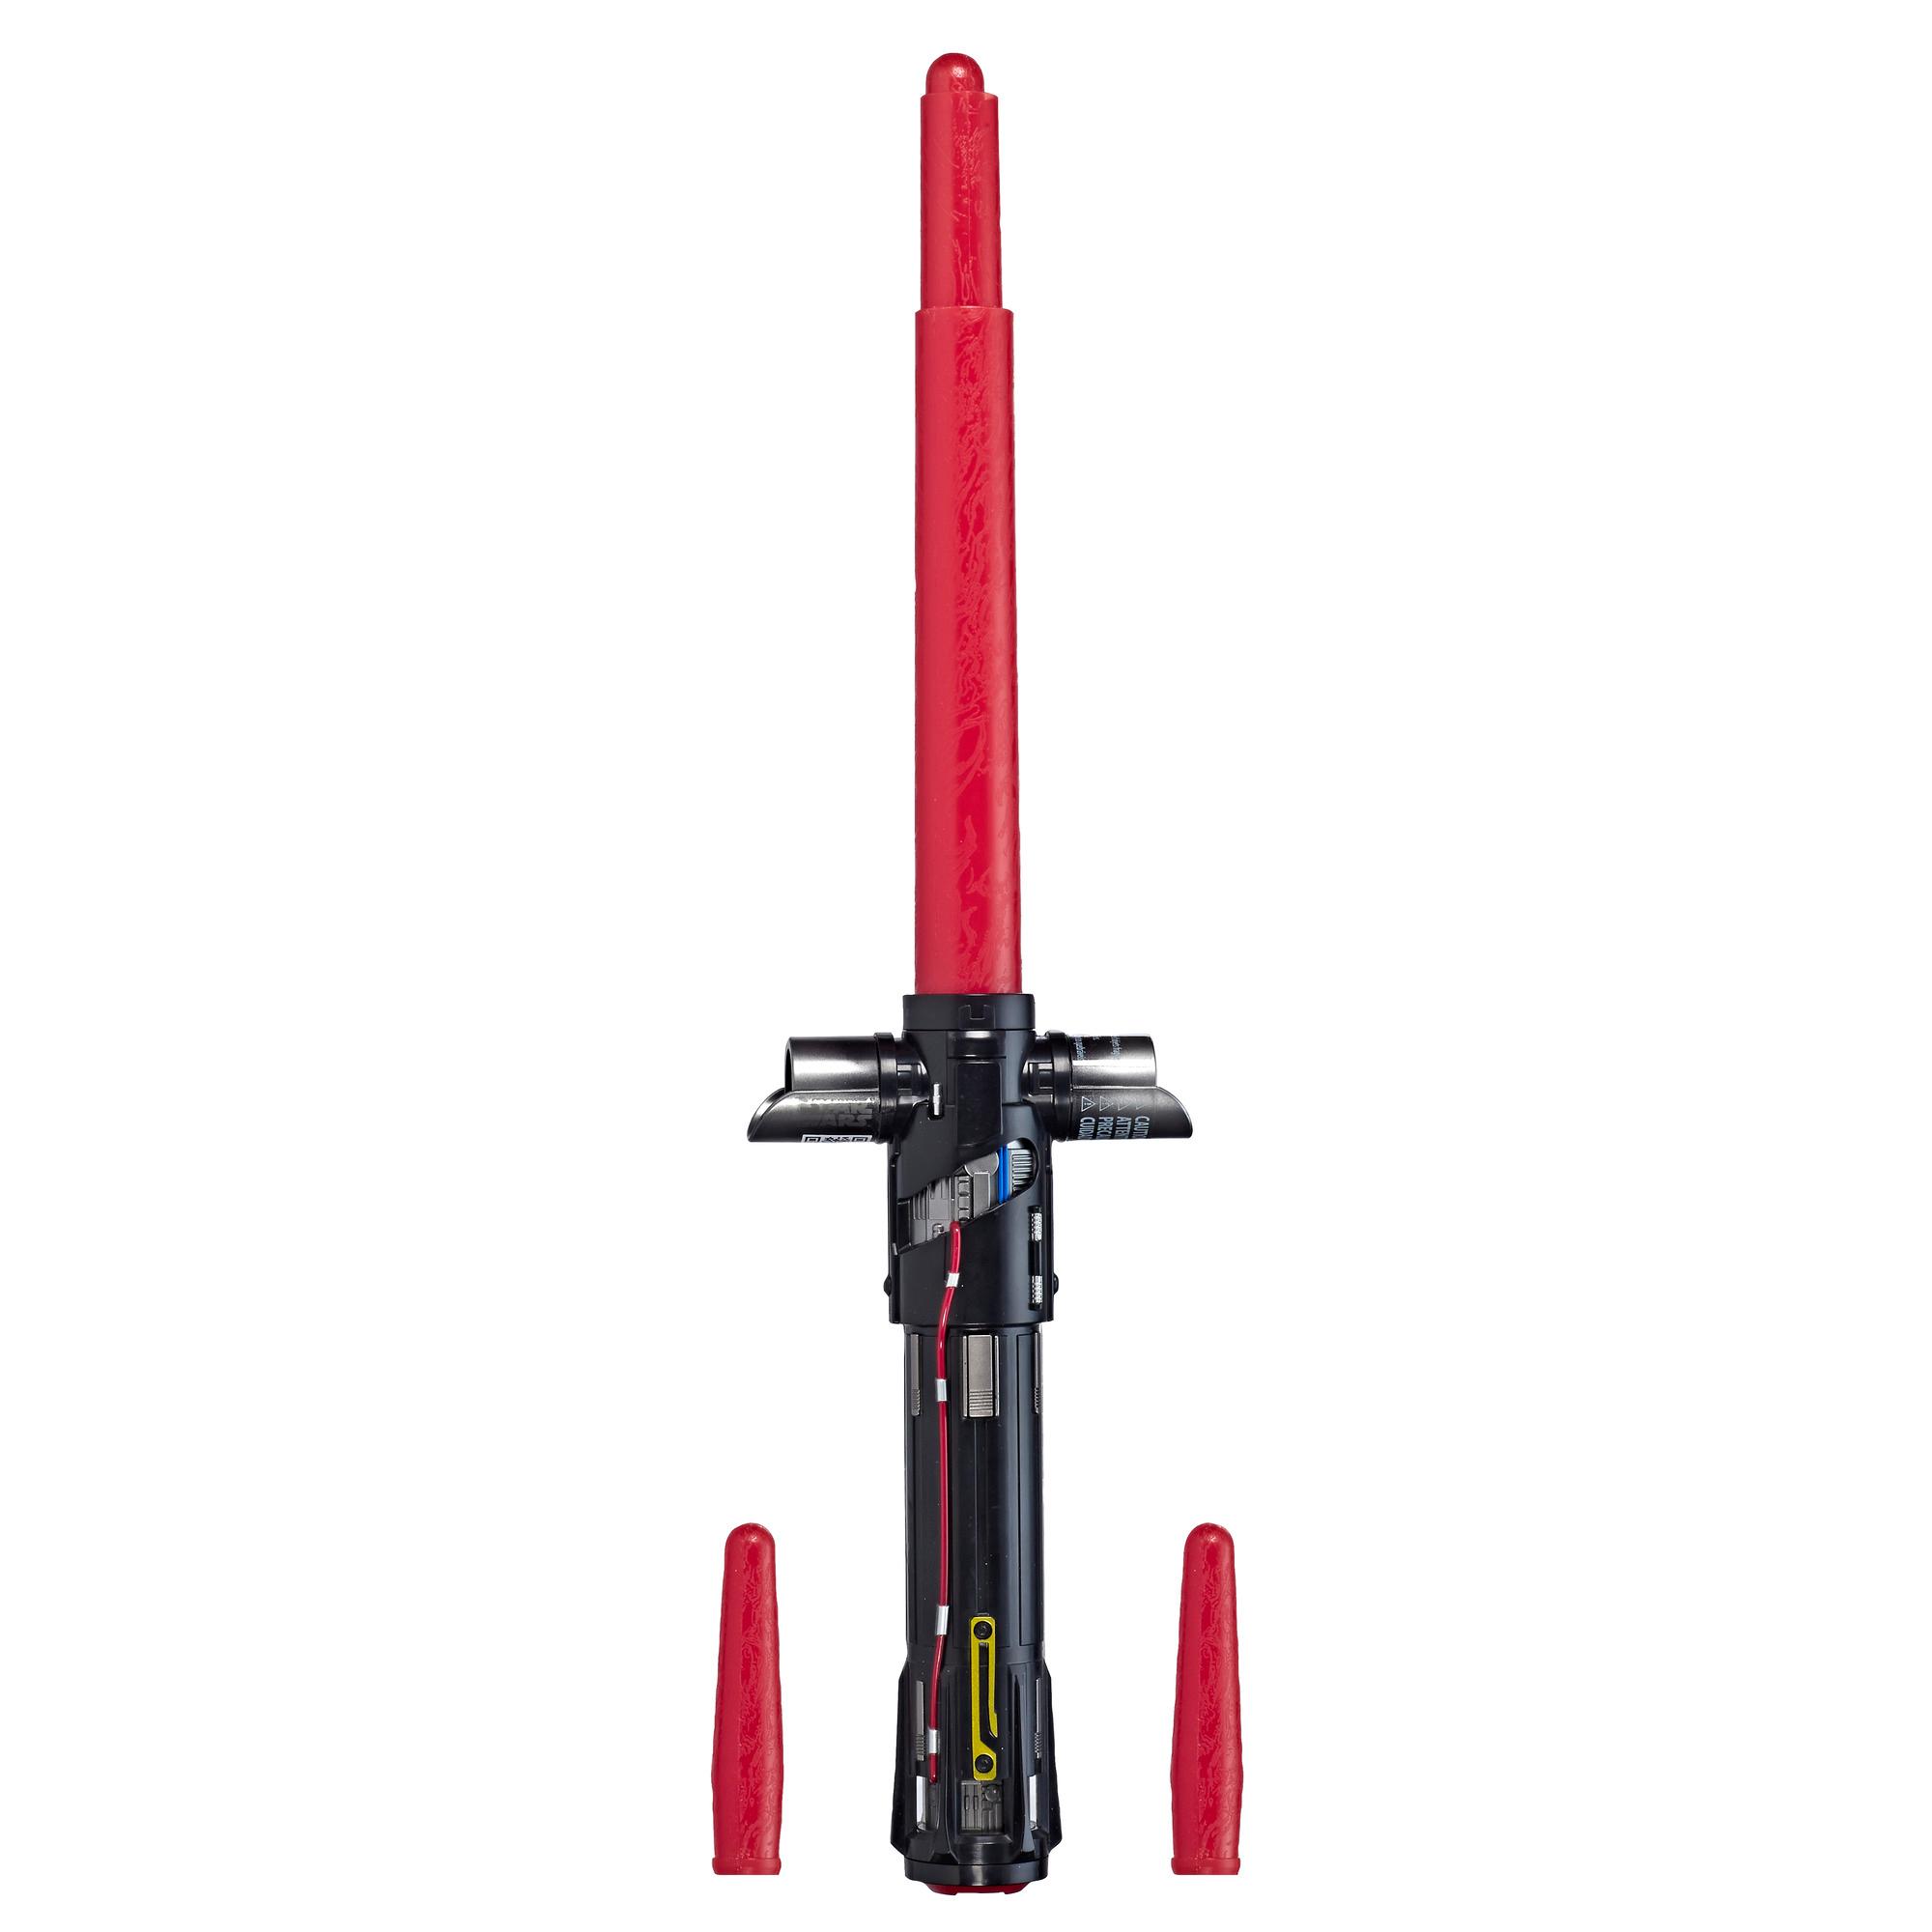 Star Wars Kylo Ren Electronic Red Lightsaber Toy for Ages 6 and Up with Lights, 